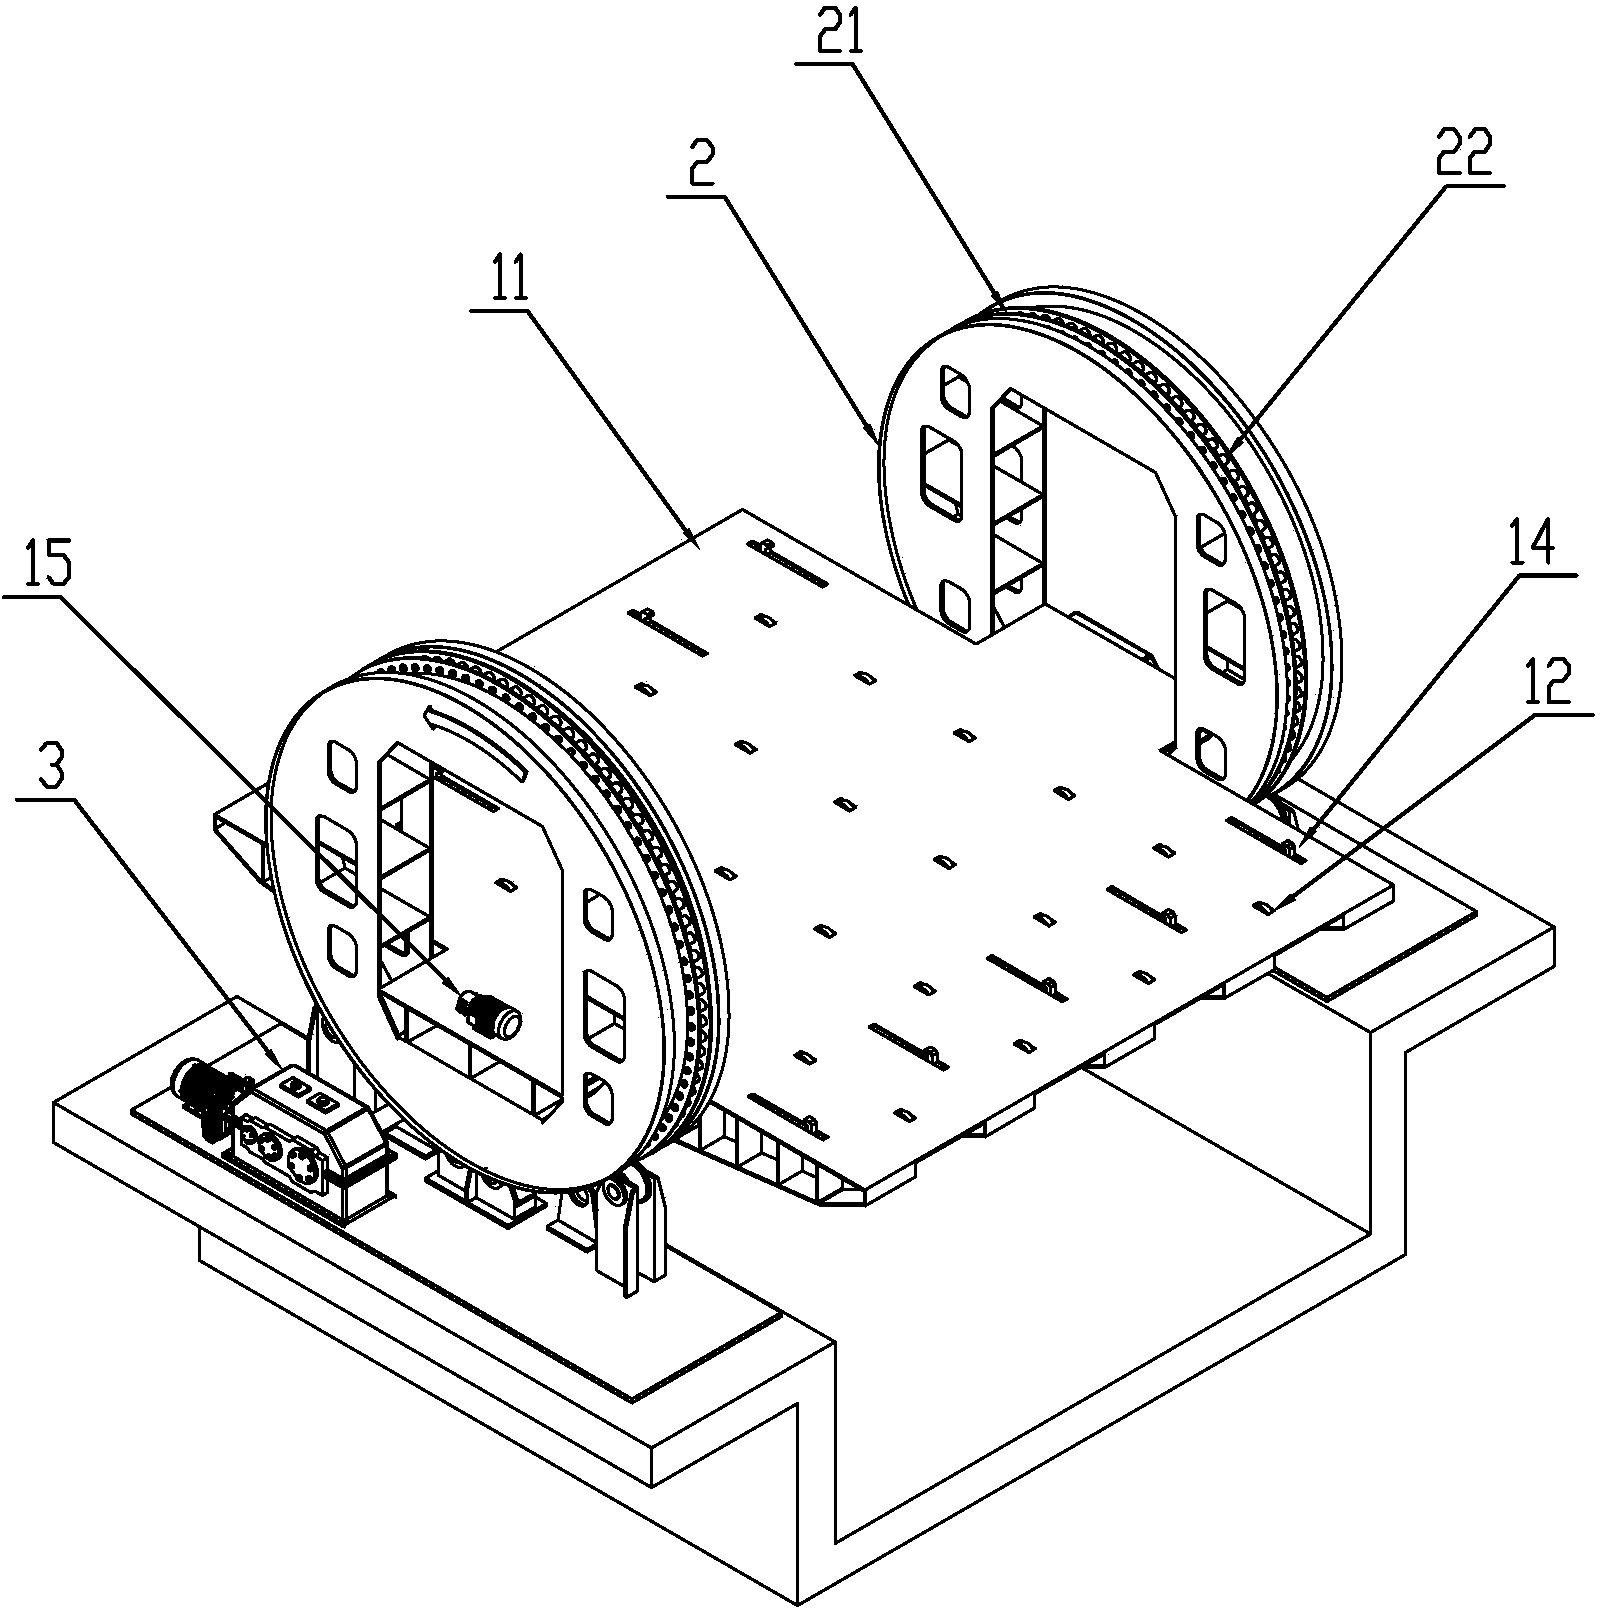 Hull block turning equipment provided with clamping and protecting mechanisms during ship construction